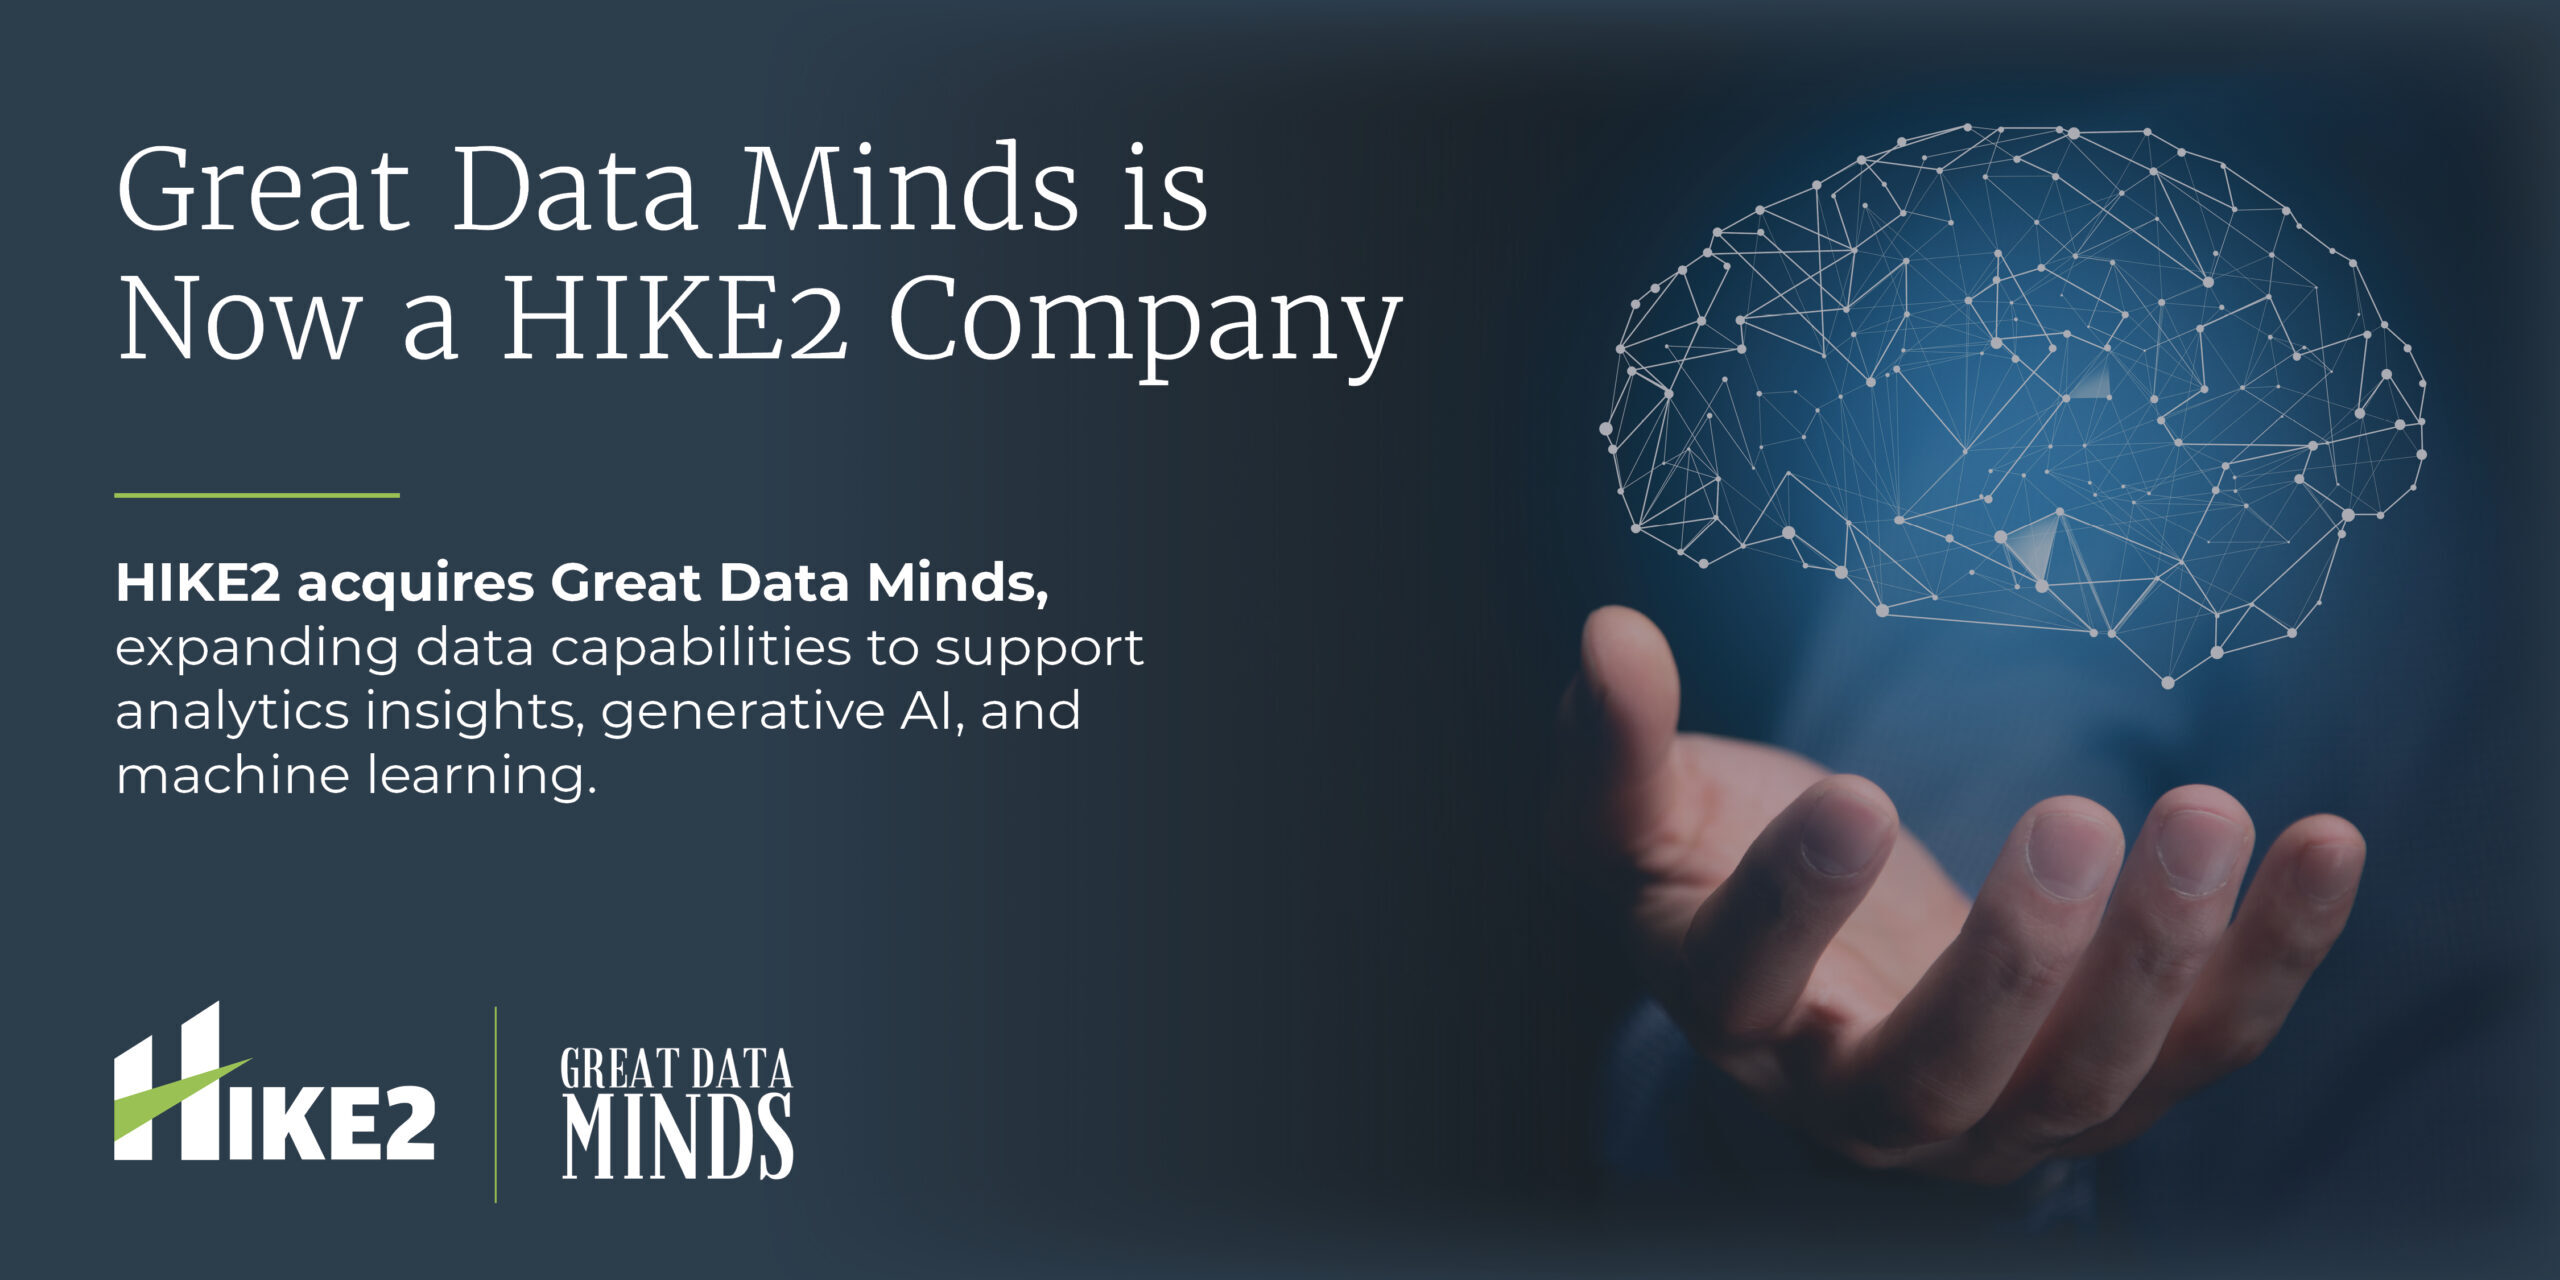 HIKE2 Acquires Great Data Minds